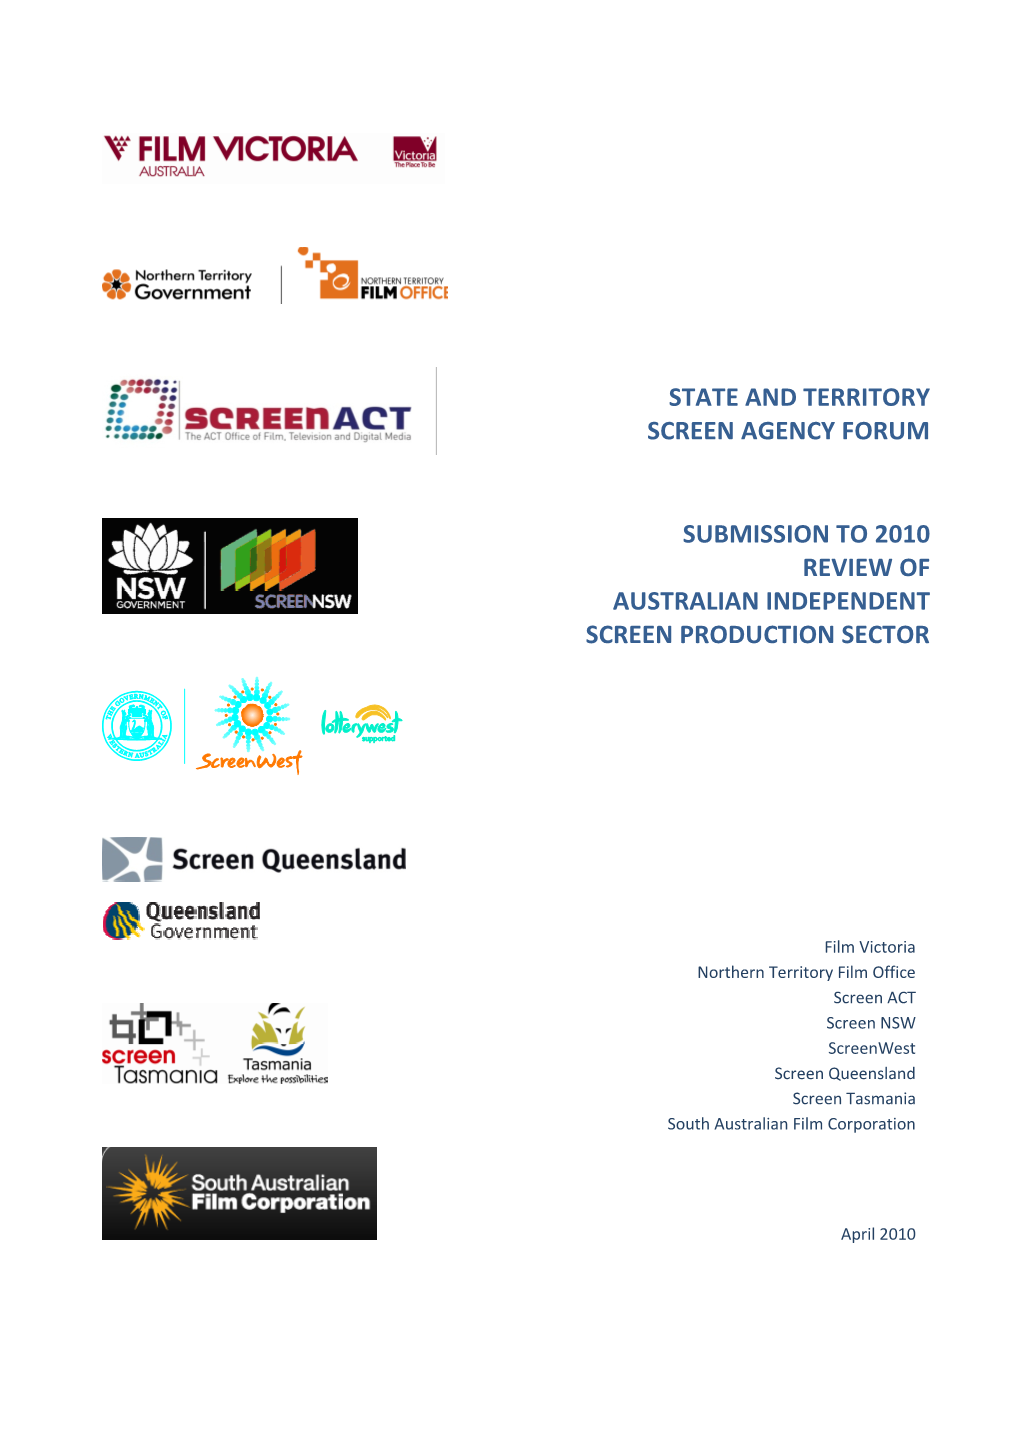 State and Territory Screen Agency Forum Submission to 2010 Review of Australian Independent Screen Production Sector